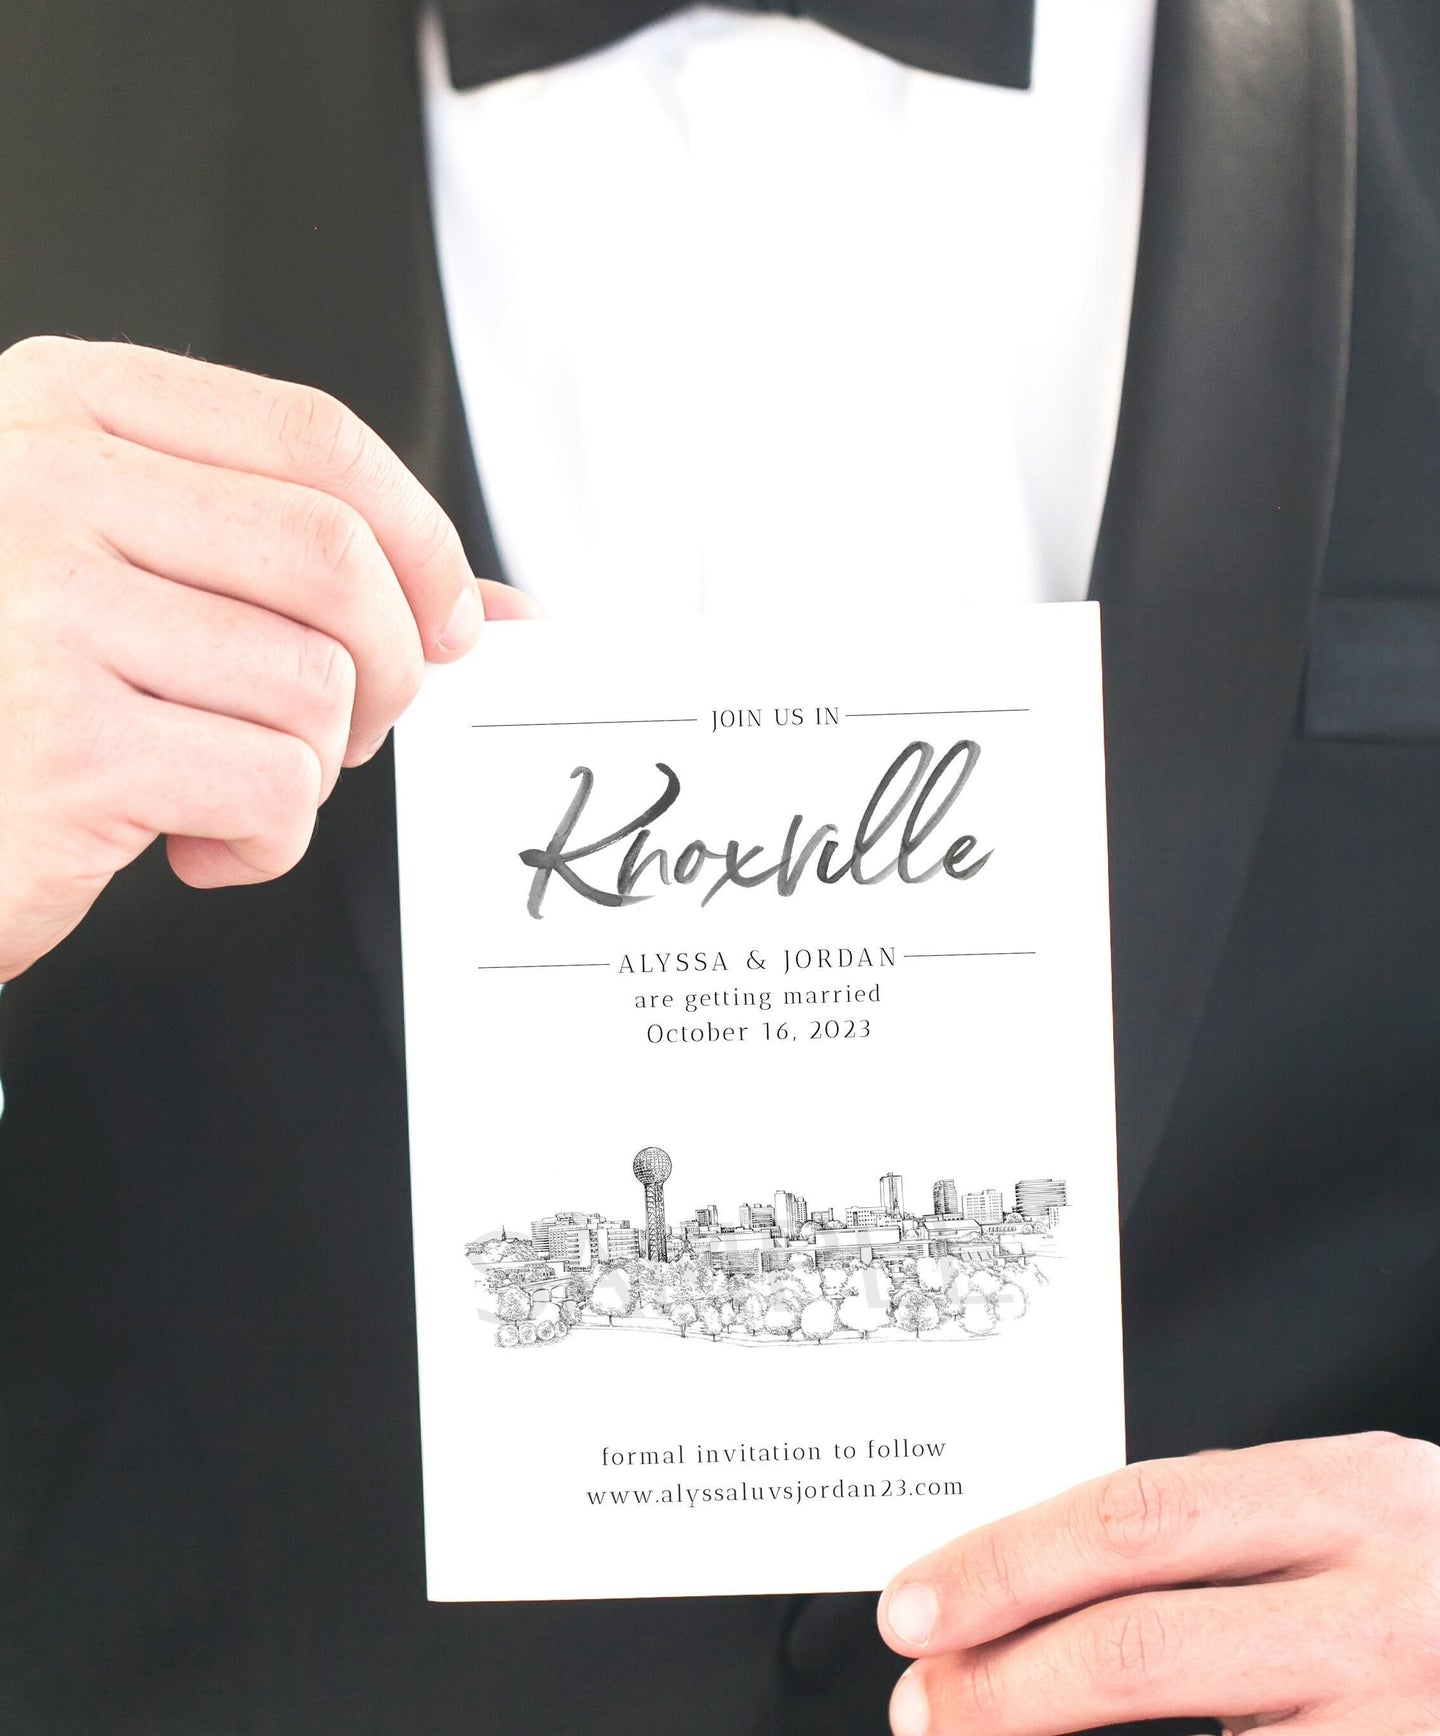 Knoxville Tennessee Skyline Save the Date Cards, Wedding Save the Dates, TN, STD, Wedding (set of 25 cards and envelopes)